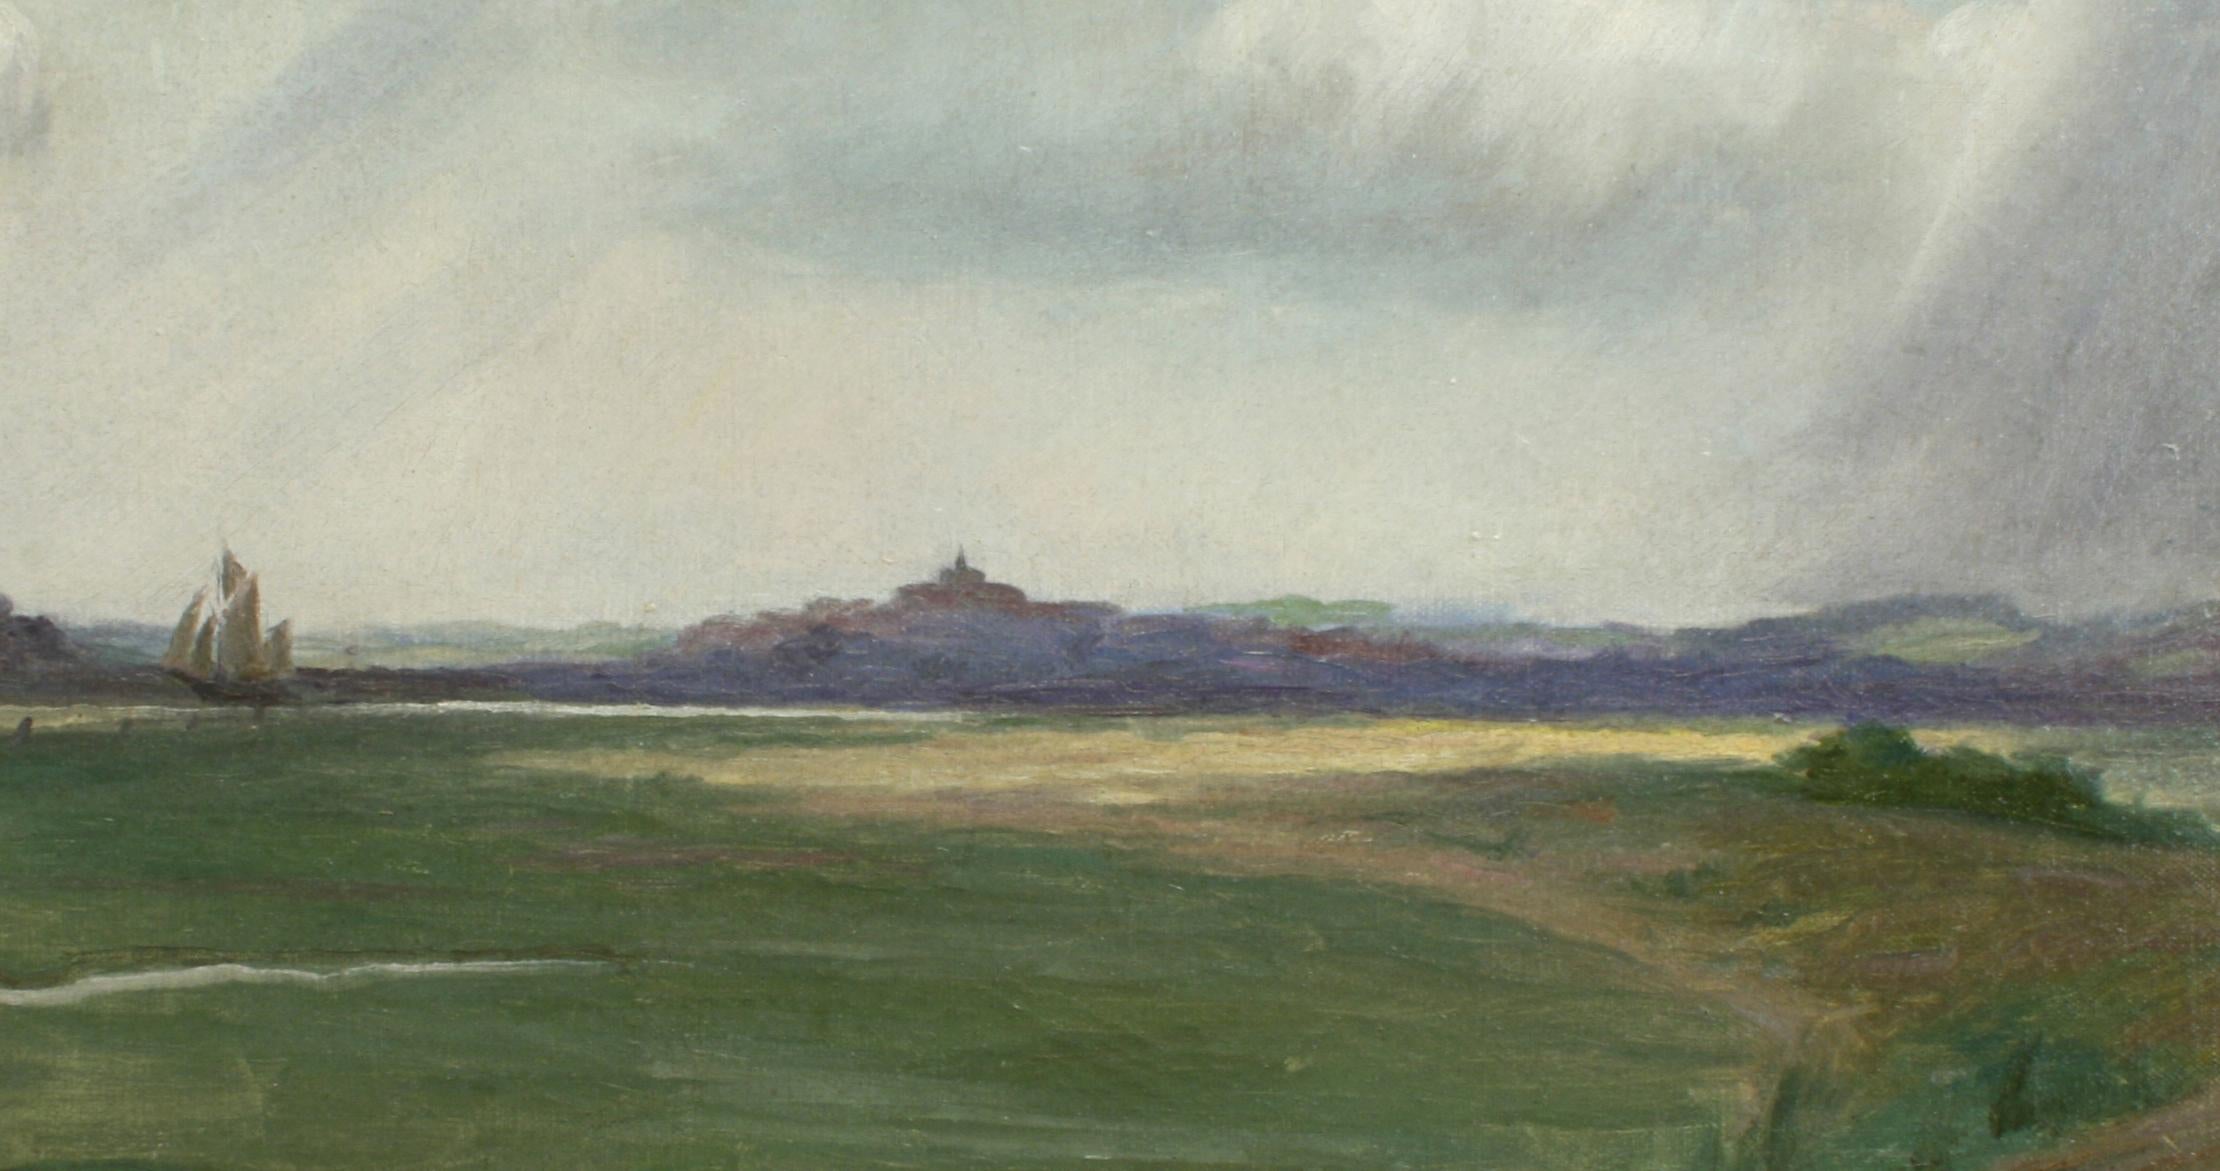 Sporting Art Golf Painting, Rye Golf Club, Rye Harbour from the 3rd Tee For Sale